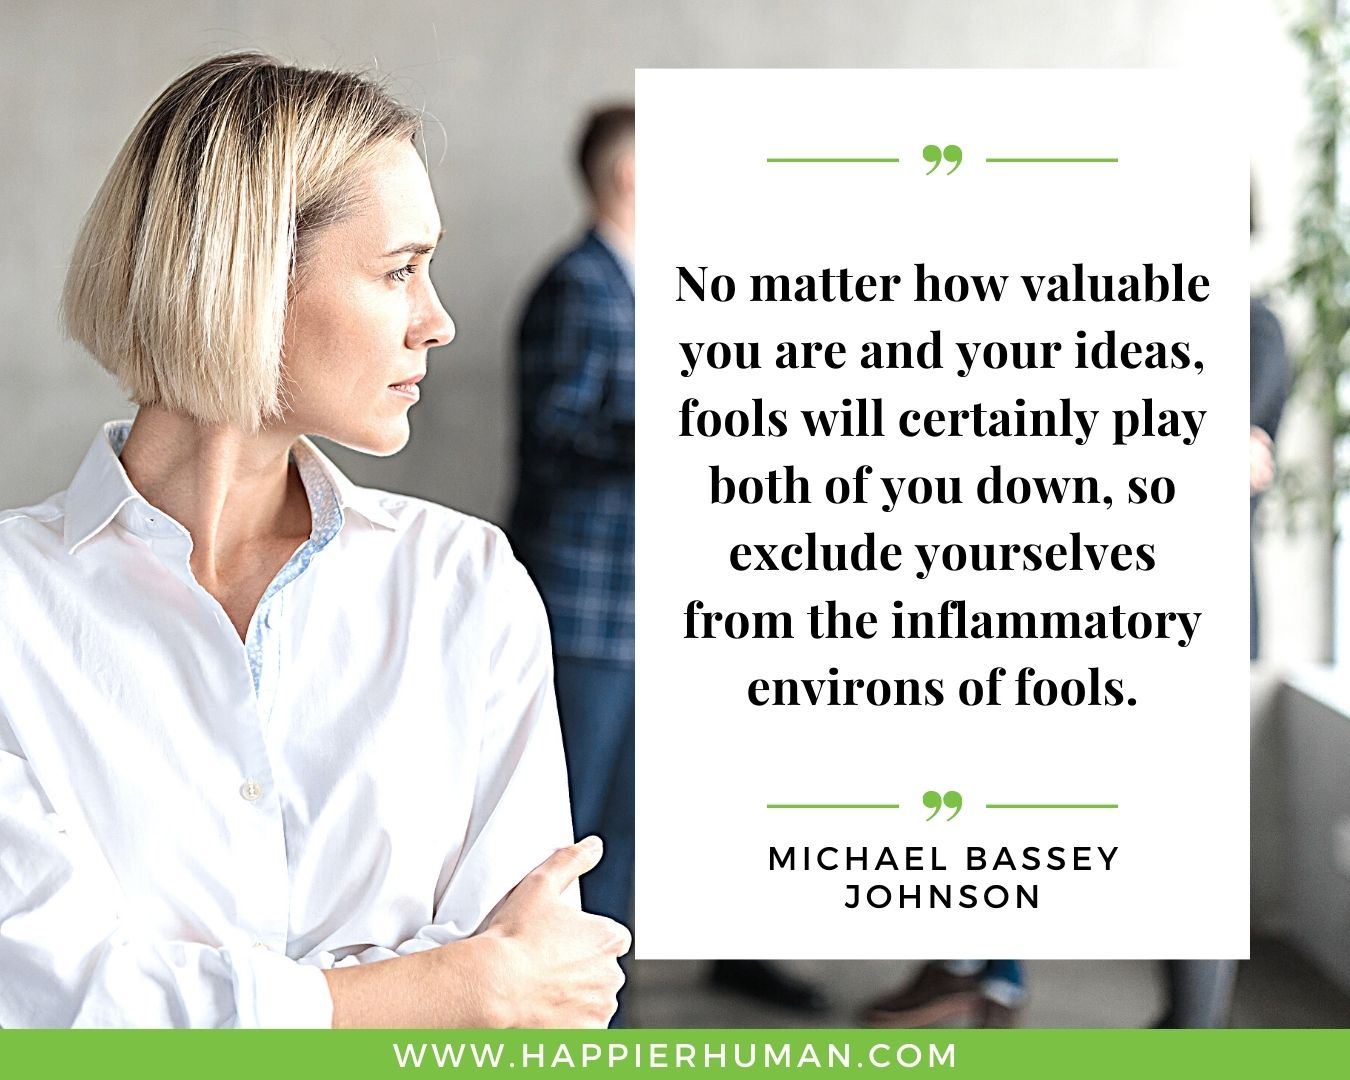 Toxic People Quotes - “No matter how valuable you are and your ideas, fools will certainly play both of you down, so exclude yourselves from the inflammatory environs of fools.” – Michael Bassey Johnson